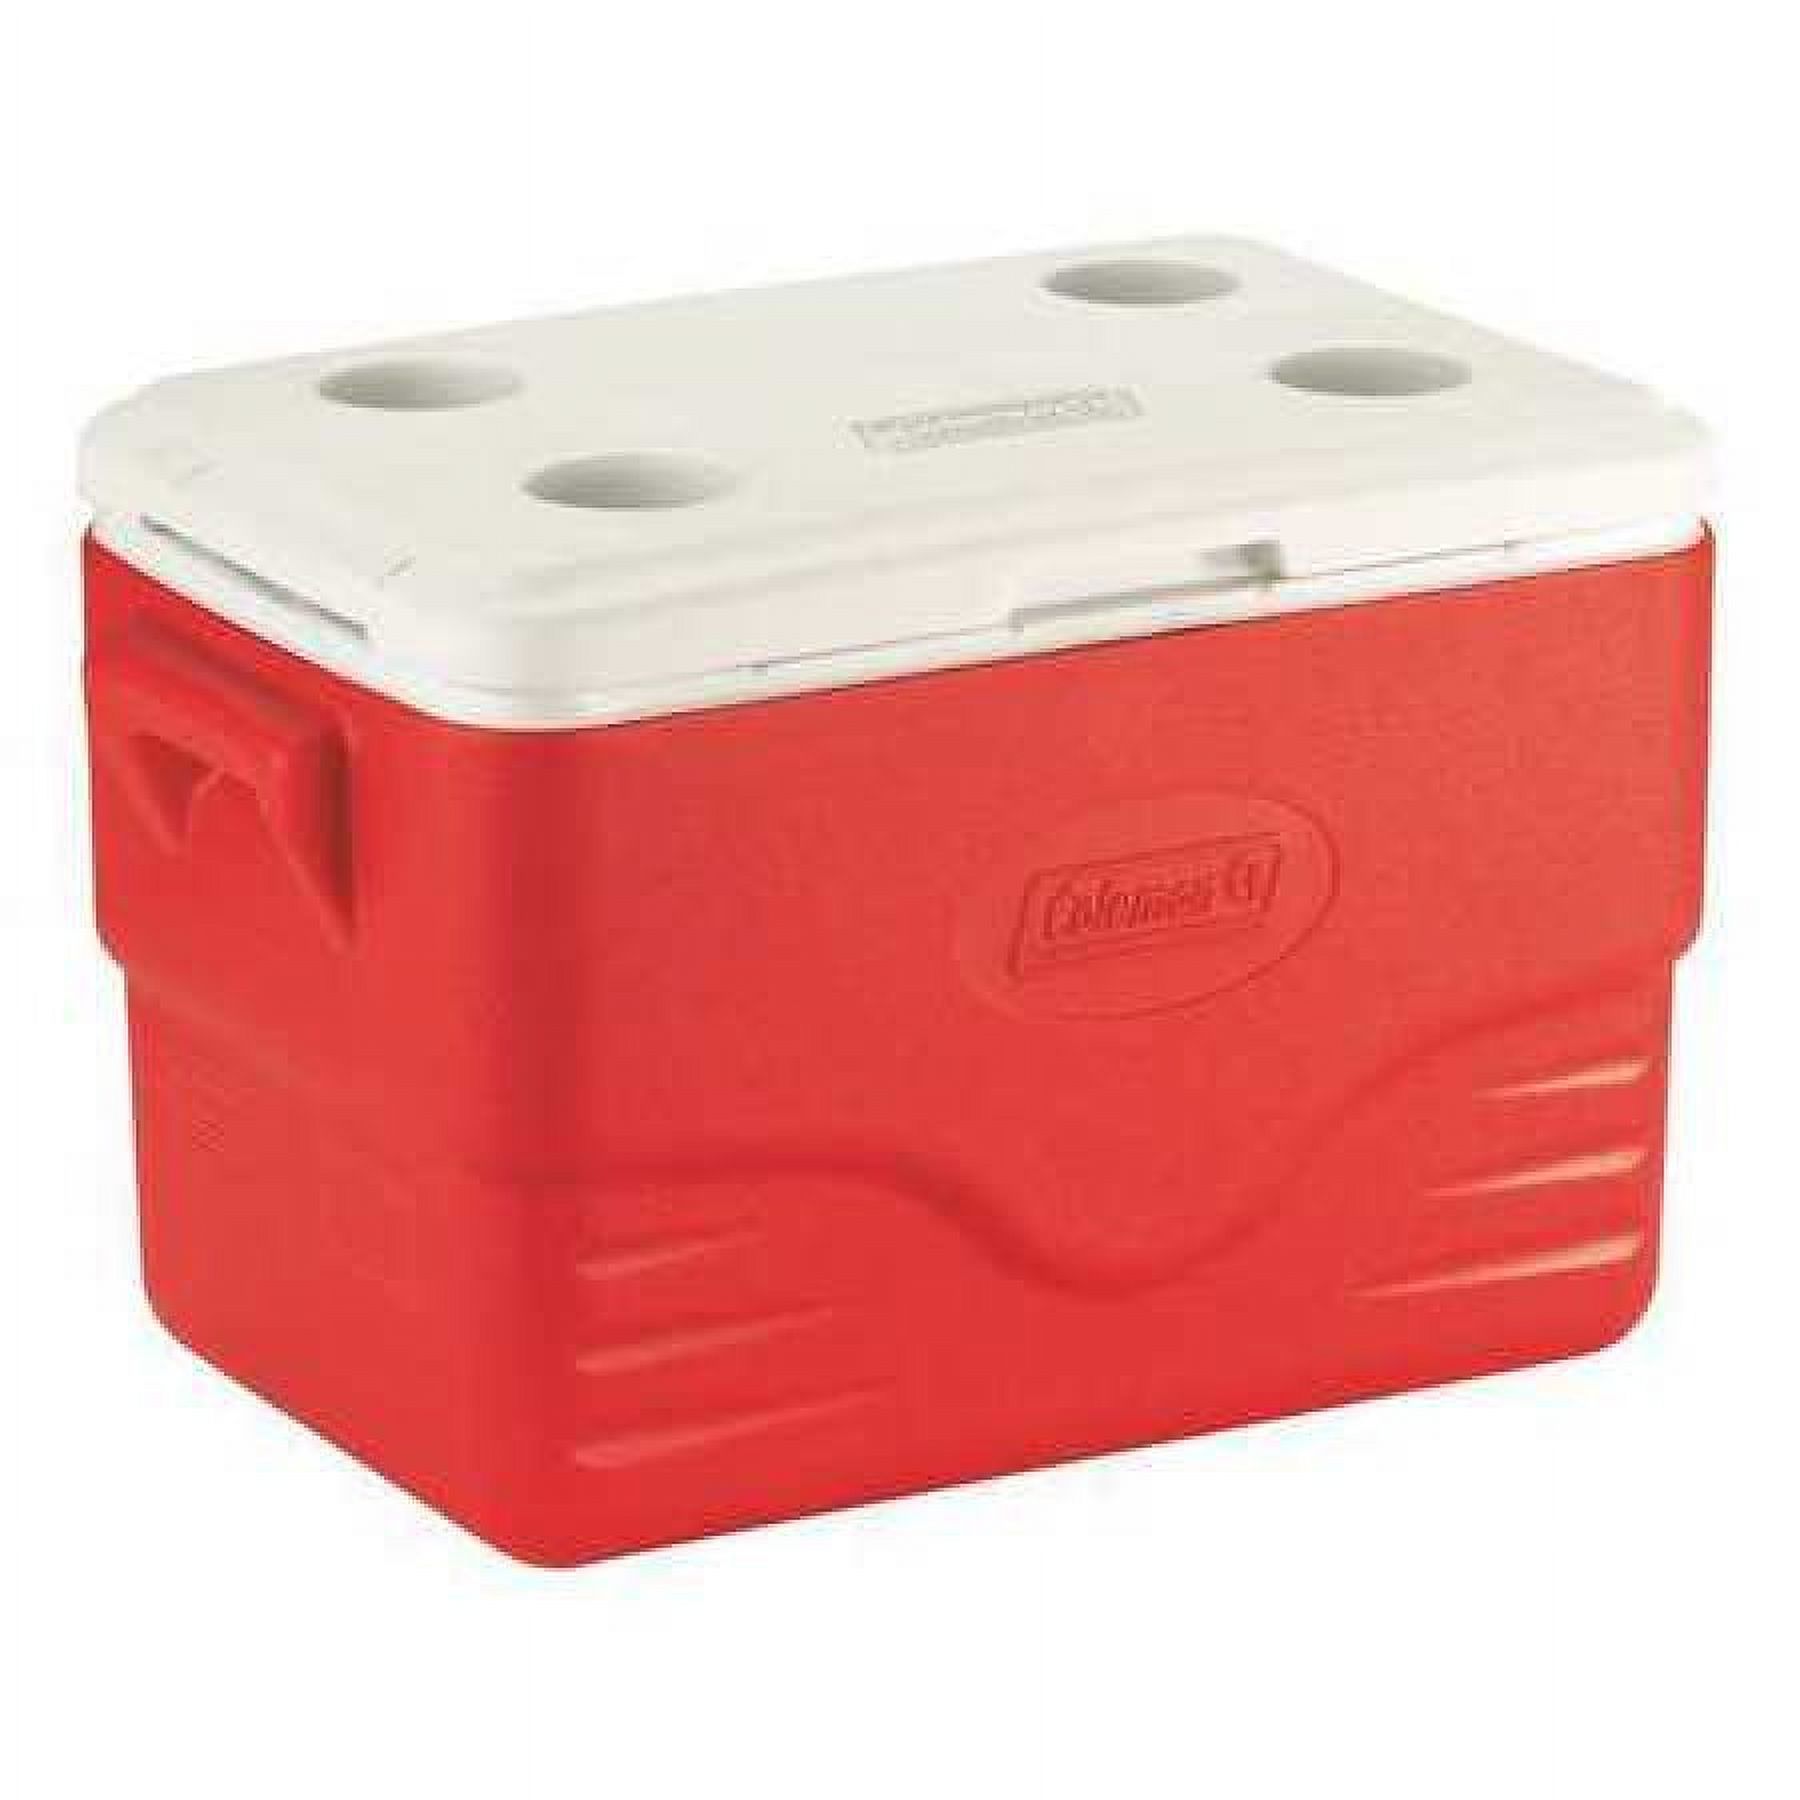 Coleman 36 qt Hard Sided, Red - image 1 of 2